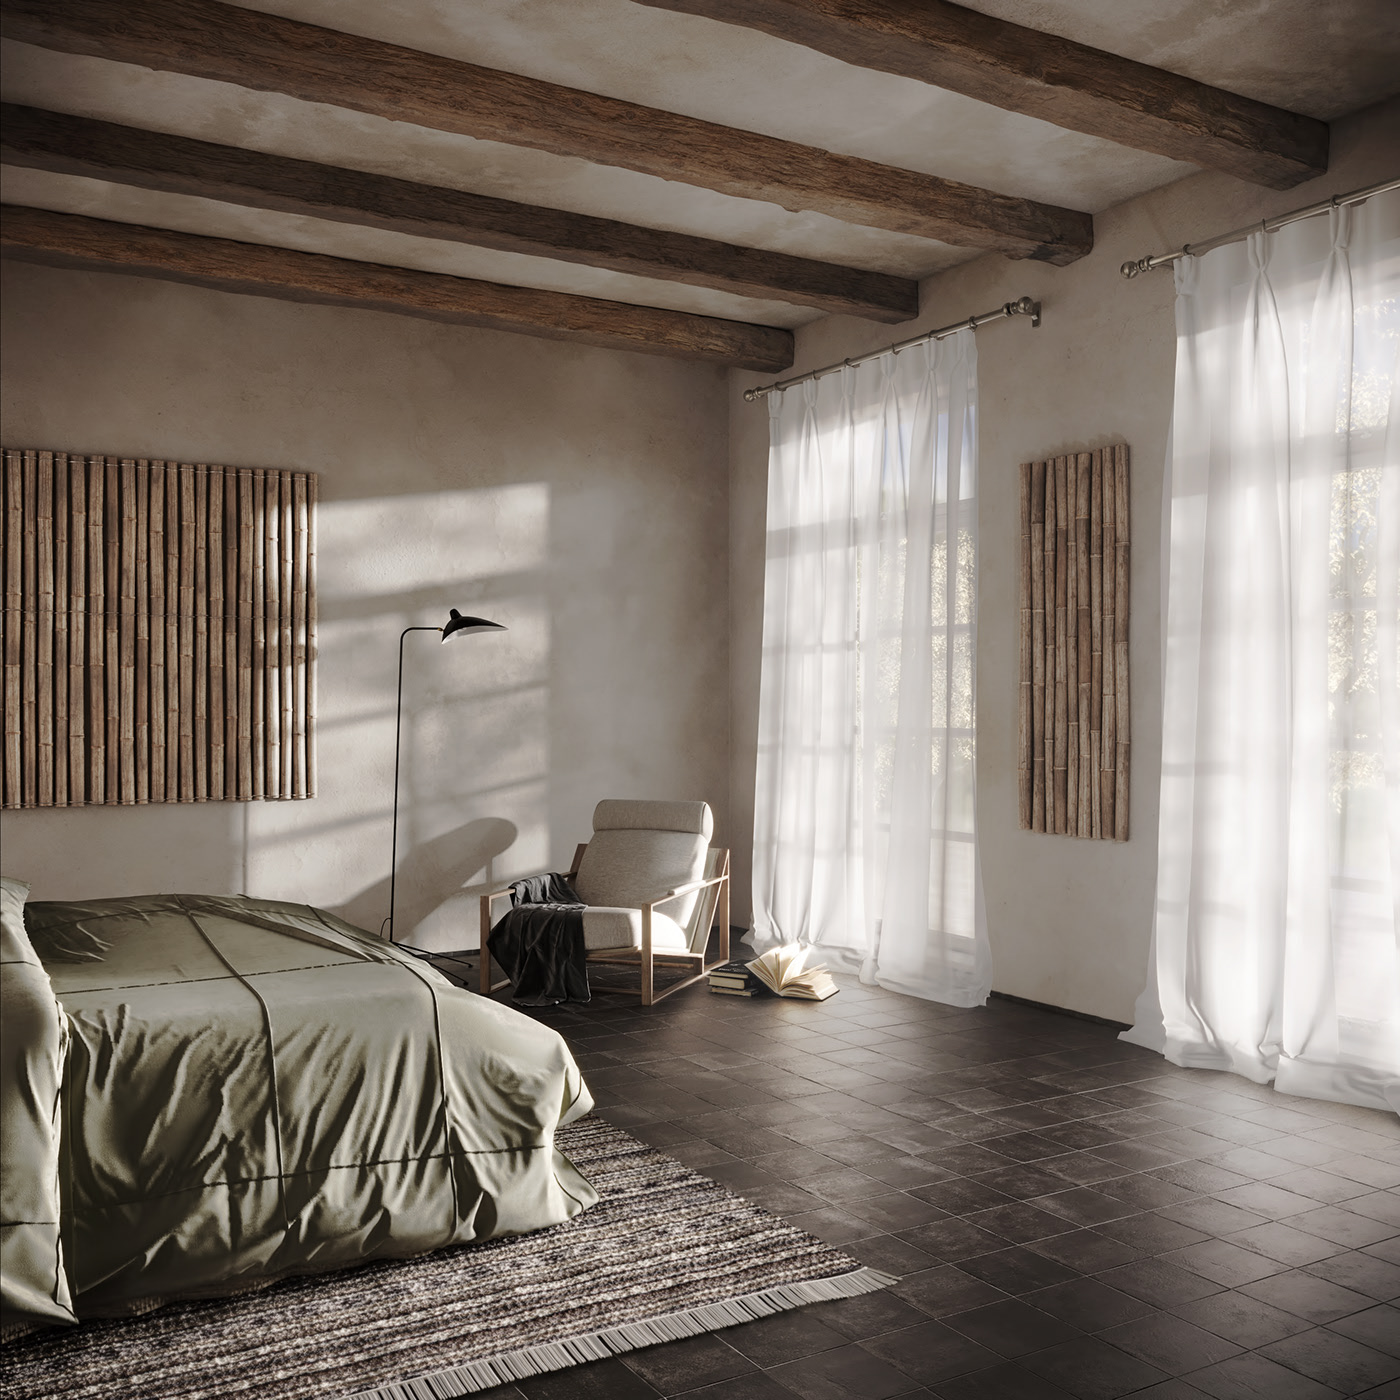 Its ceiling and floor are designed with a rudimentary layout that intentionally creates liberal and strong lines. Two large windows opposite the bed welcome the sunshine through their two thin white curtains, which highlight these lines.